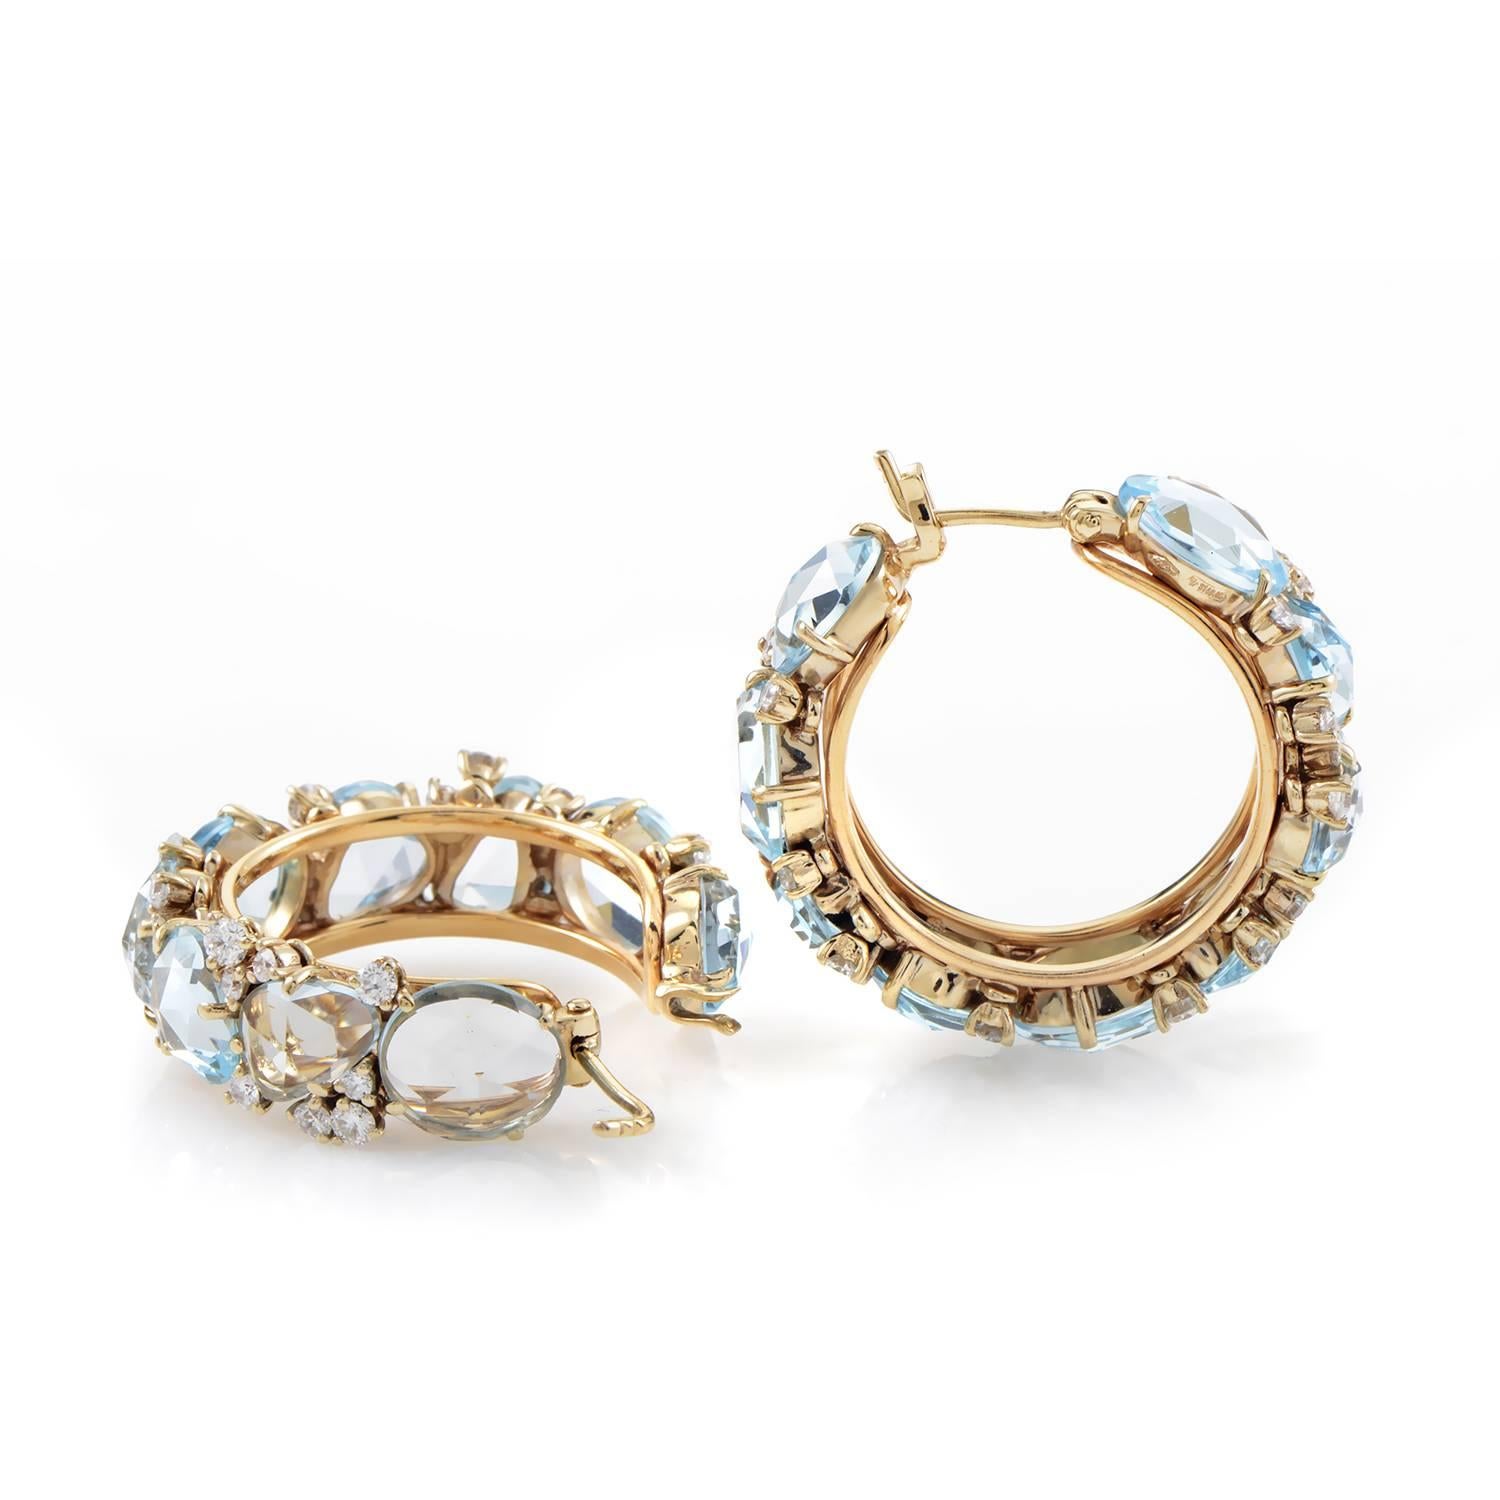 A scintillating and enchanting sight to behold, these majestic earrings from Pomellato are made of 18K yellow gold and adorned with a bright blend of diamonds totaling 1.02 carats and topaz stones with their pleasing watery glisten.
Retail Price: